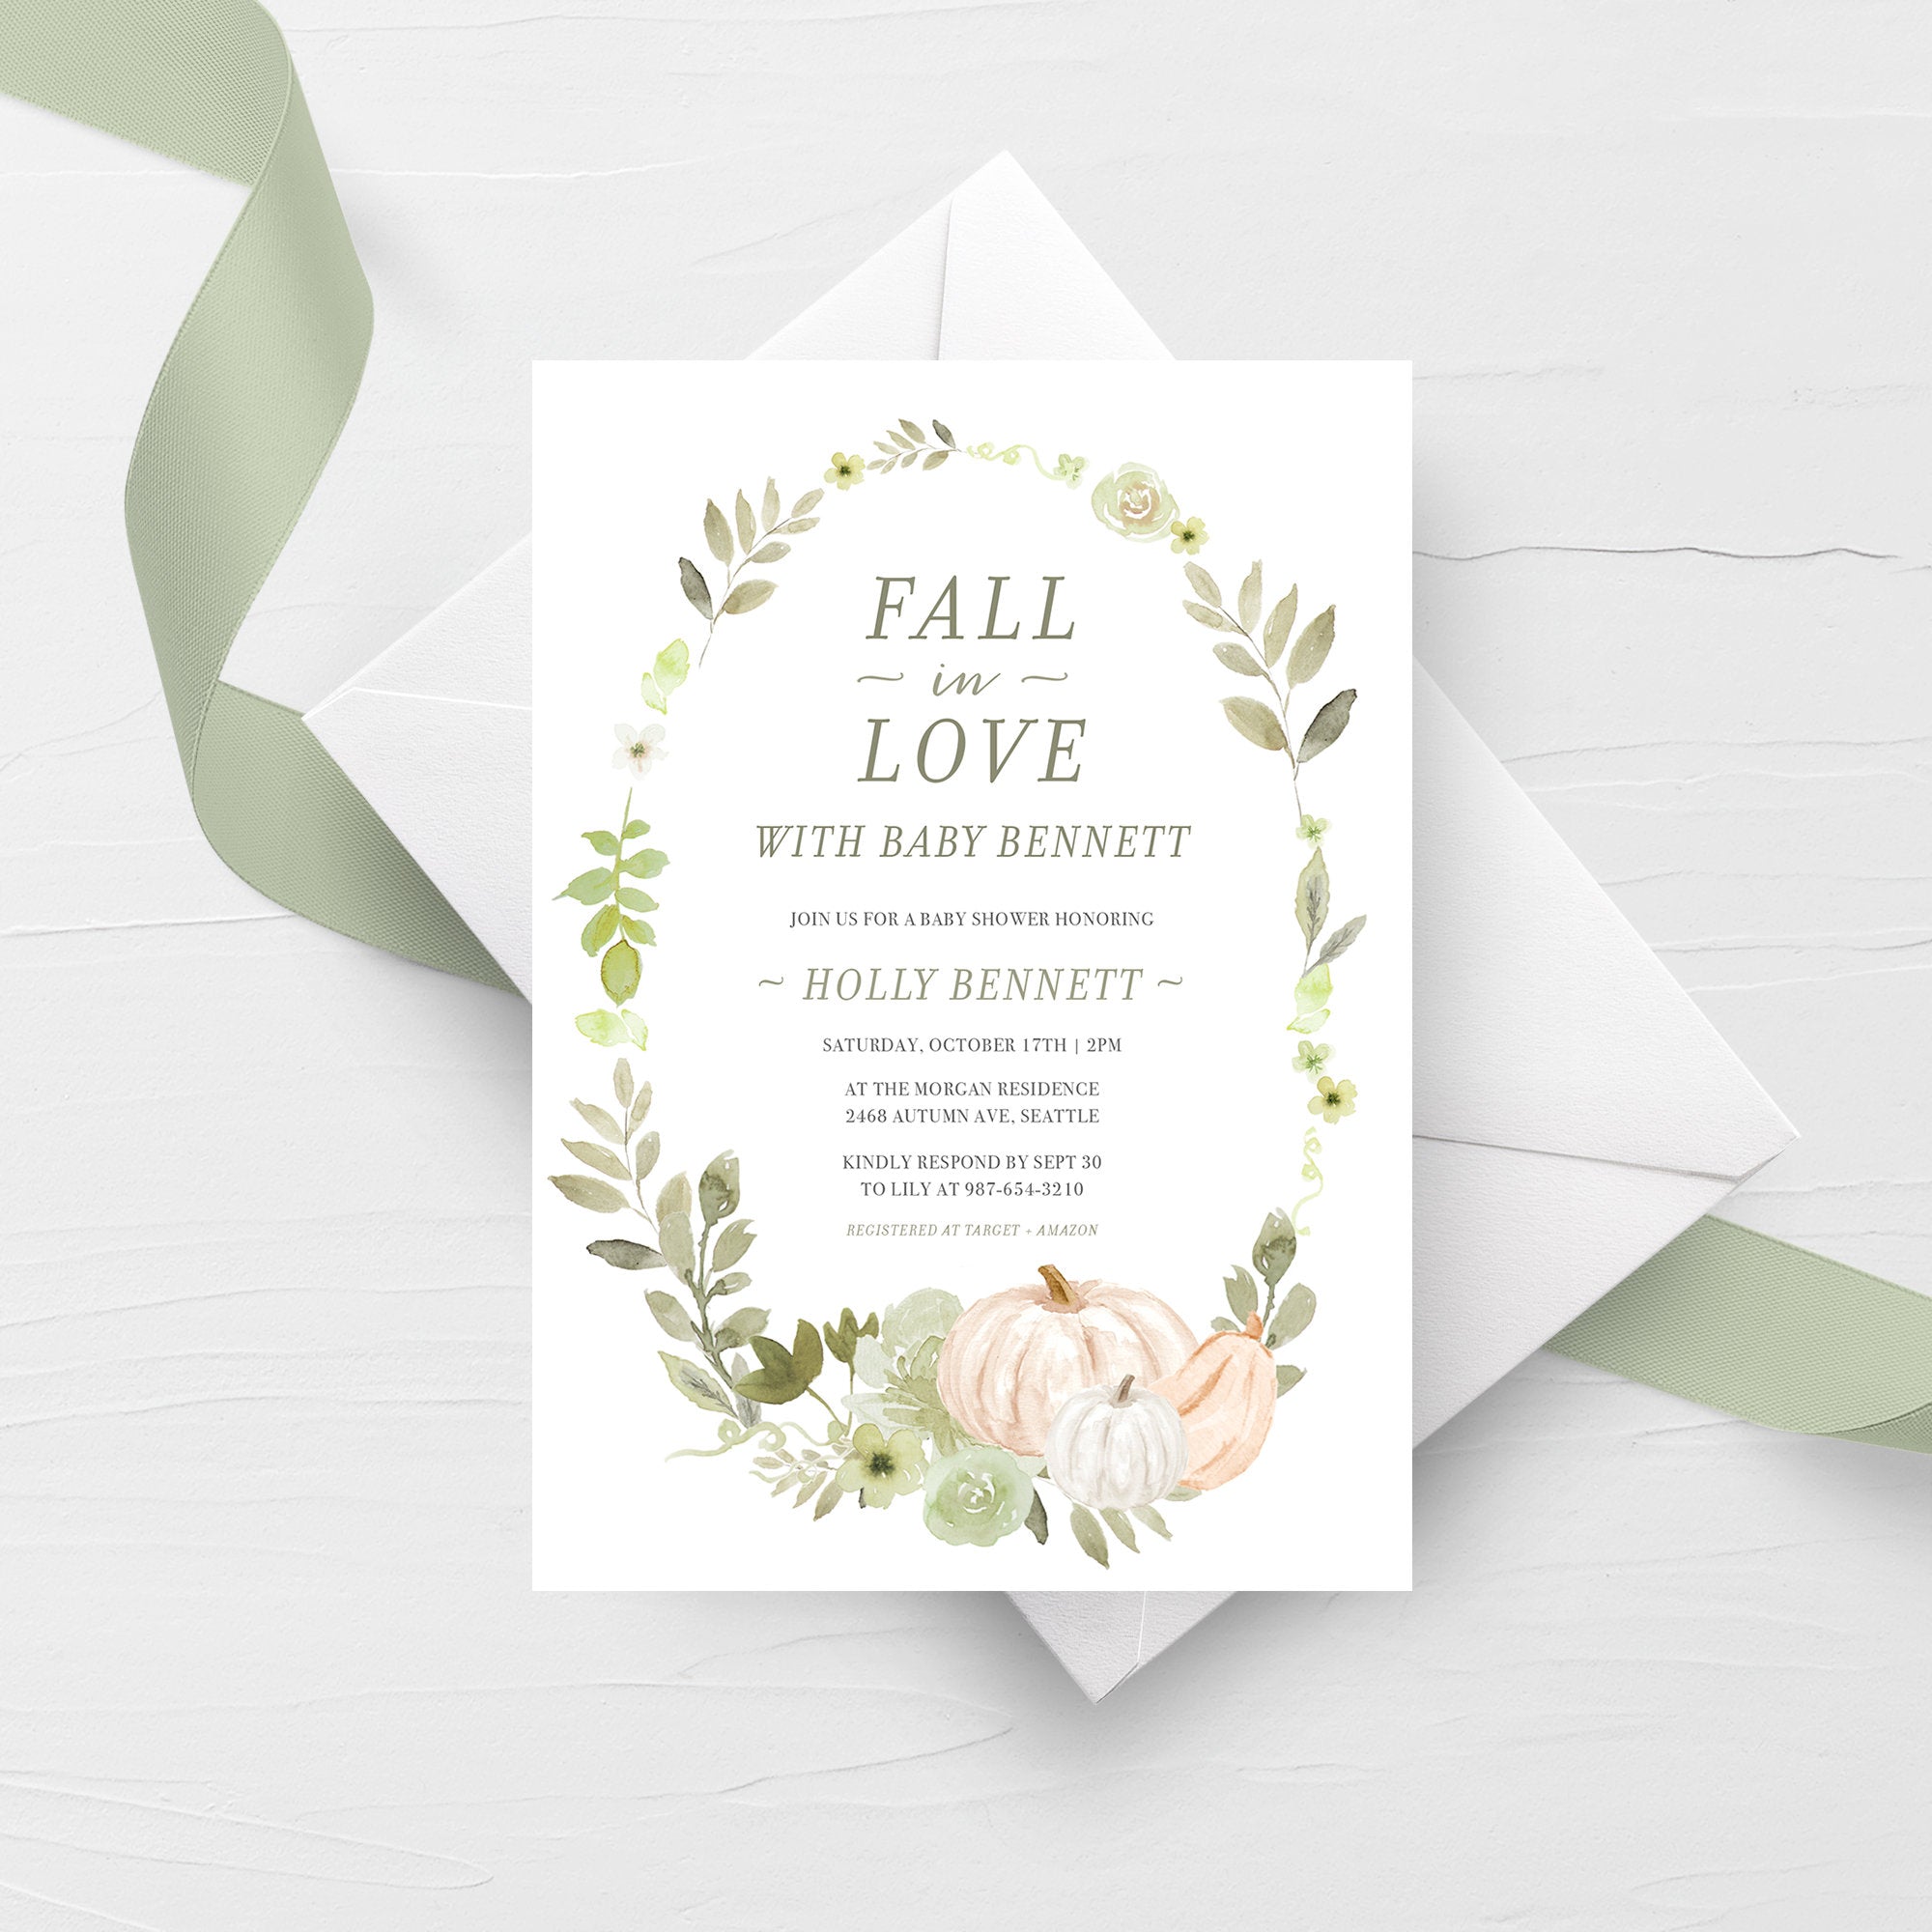 Fall Baby Shower Invite Template, Fall In Love Baby Shower Invitation, Printable Pumpkin Fall Baby Shower Invitation INSTANT DOWNLOAD PG100